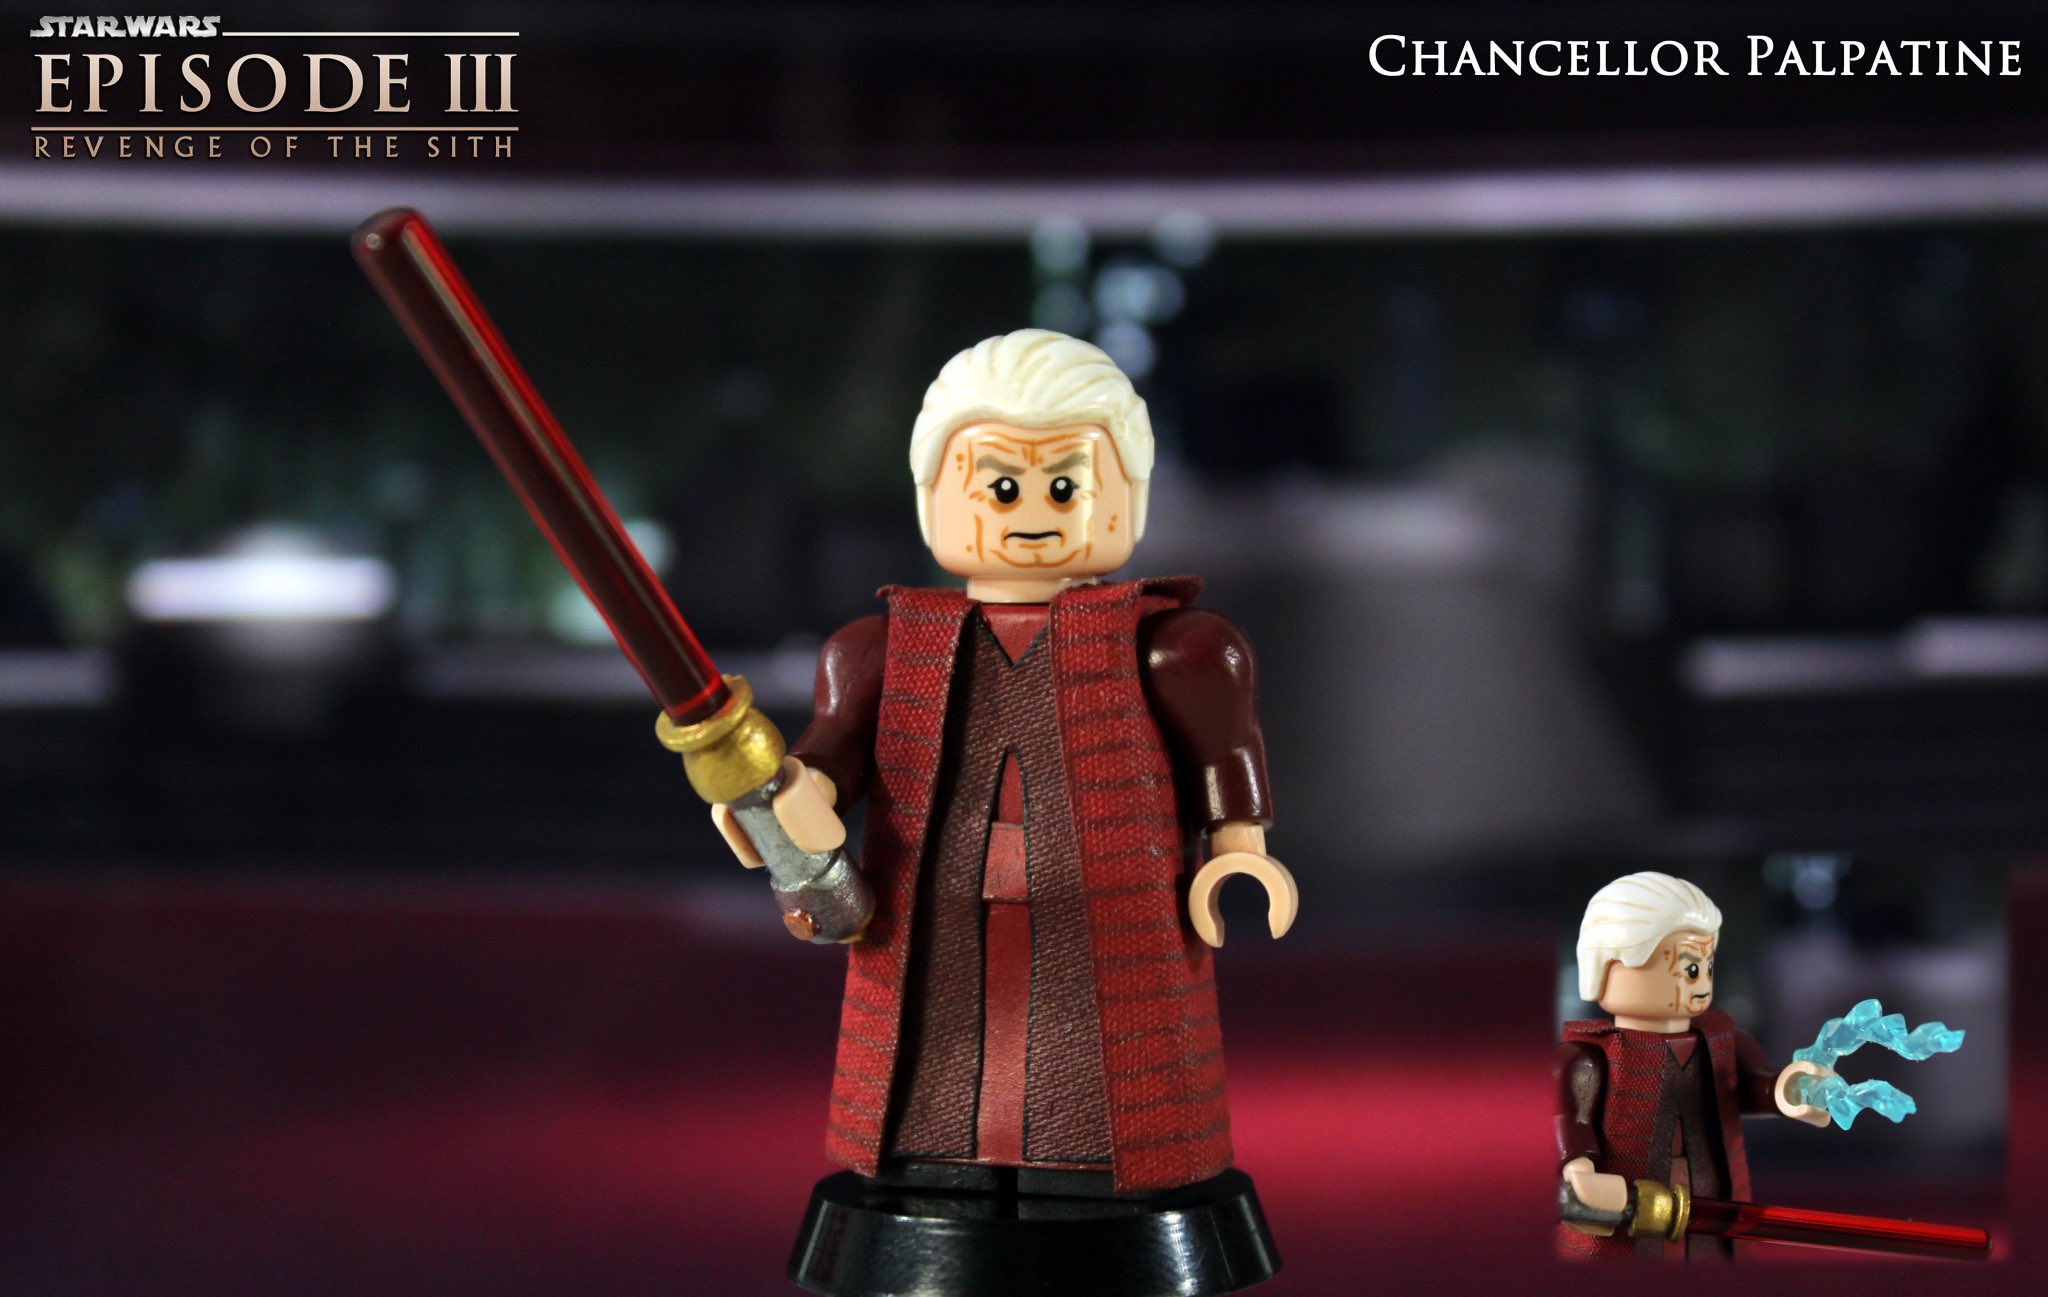 lego star wars revenge of the sith